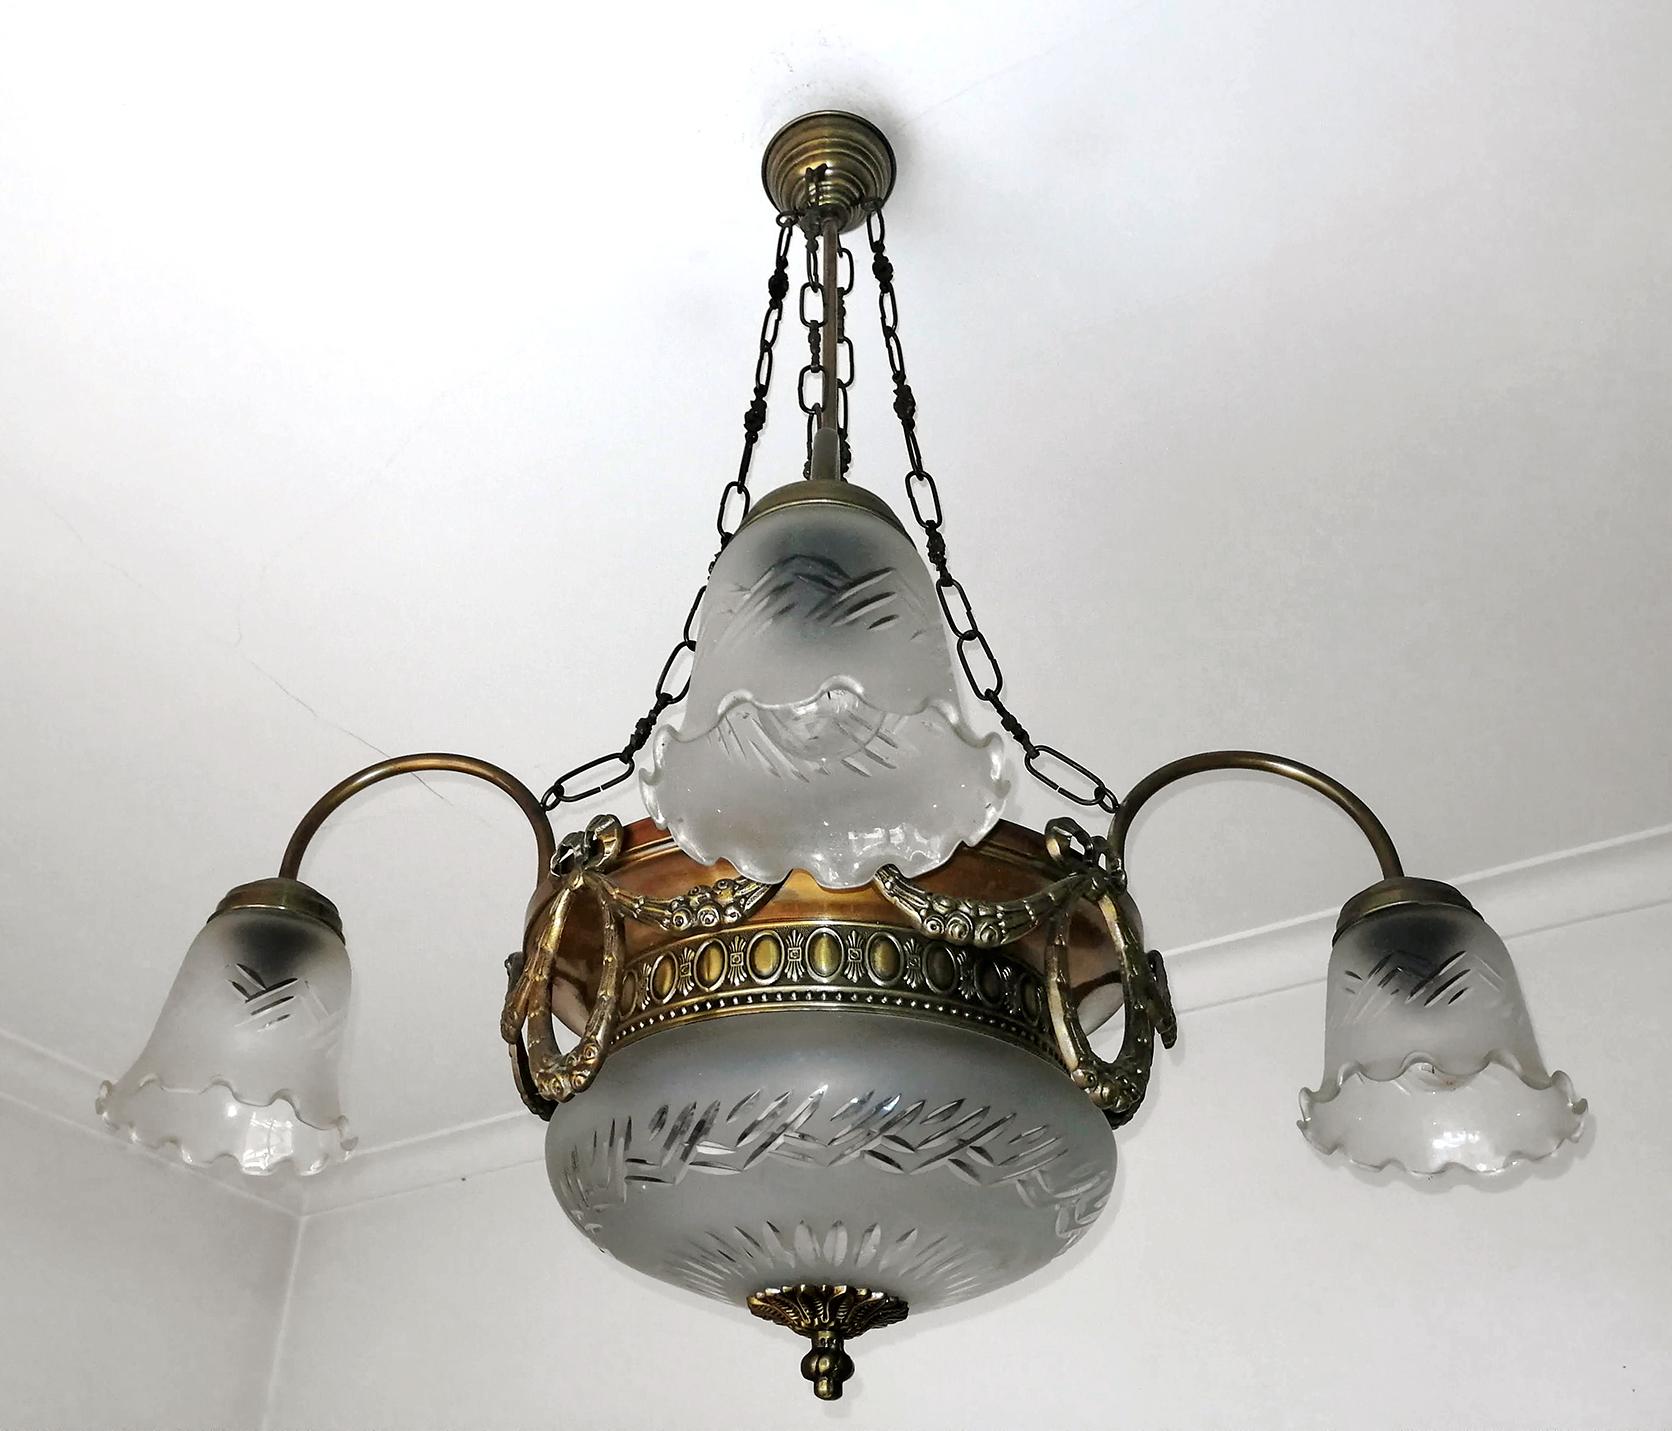 An unusual antique French Art Deco wheel cut etched glass globes 6-light chandelier,
6 bulbs E14/ good working condition.
Measures:
Diameter 70cm/ 27.56 in
Height 80cm/ 31.50 in
Glass bowl 25 x 12 cm.
Glass globes 12 x 12 cm.
Assembly required.